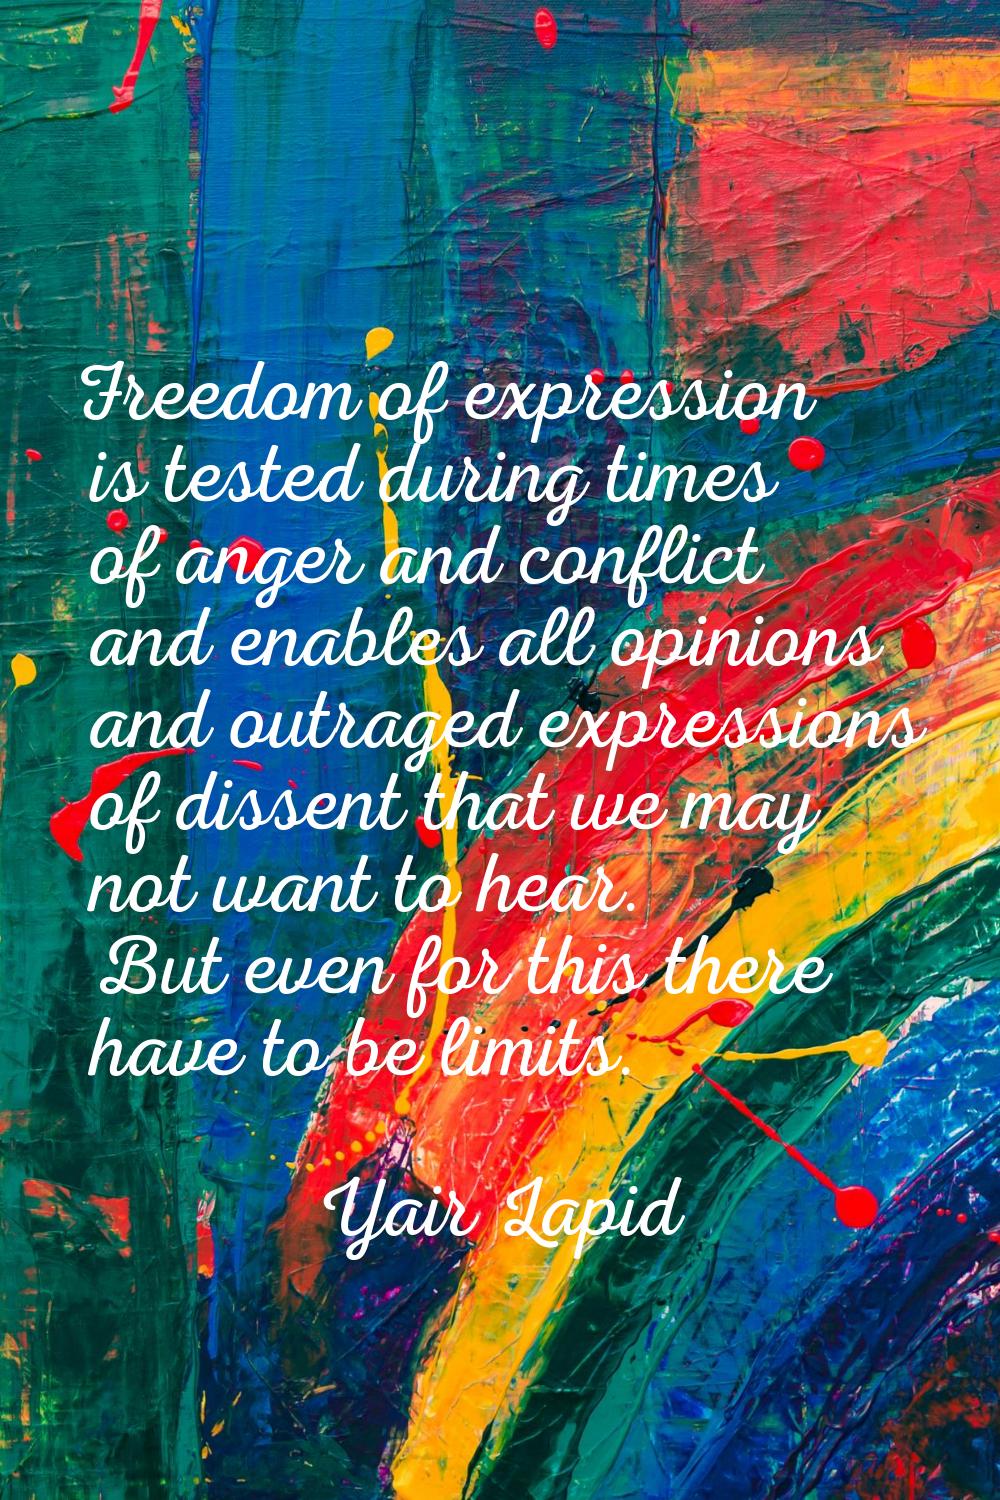 Freedom of expression is tested during times of anger and conflict and enables all opinions and out